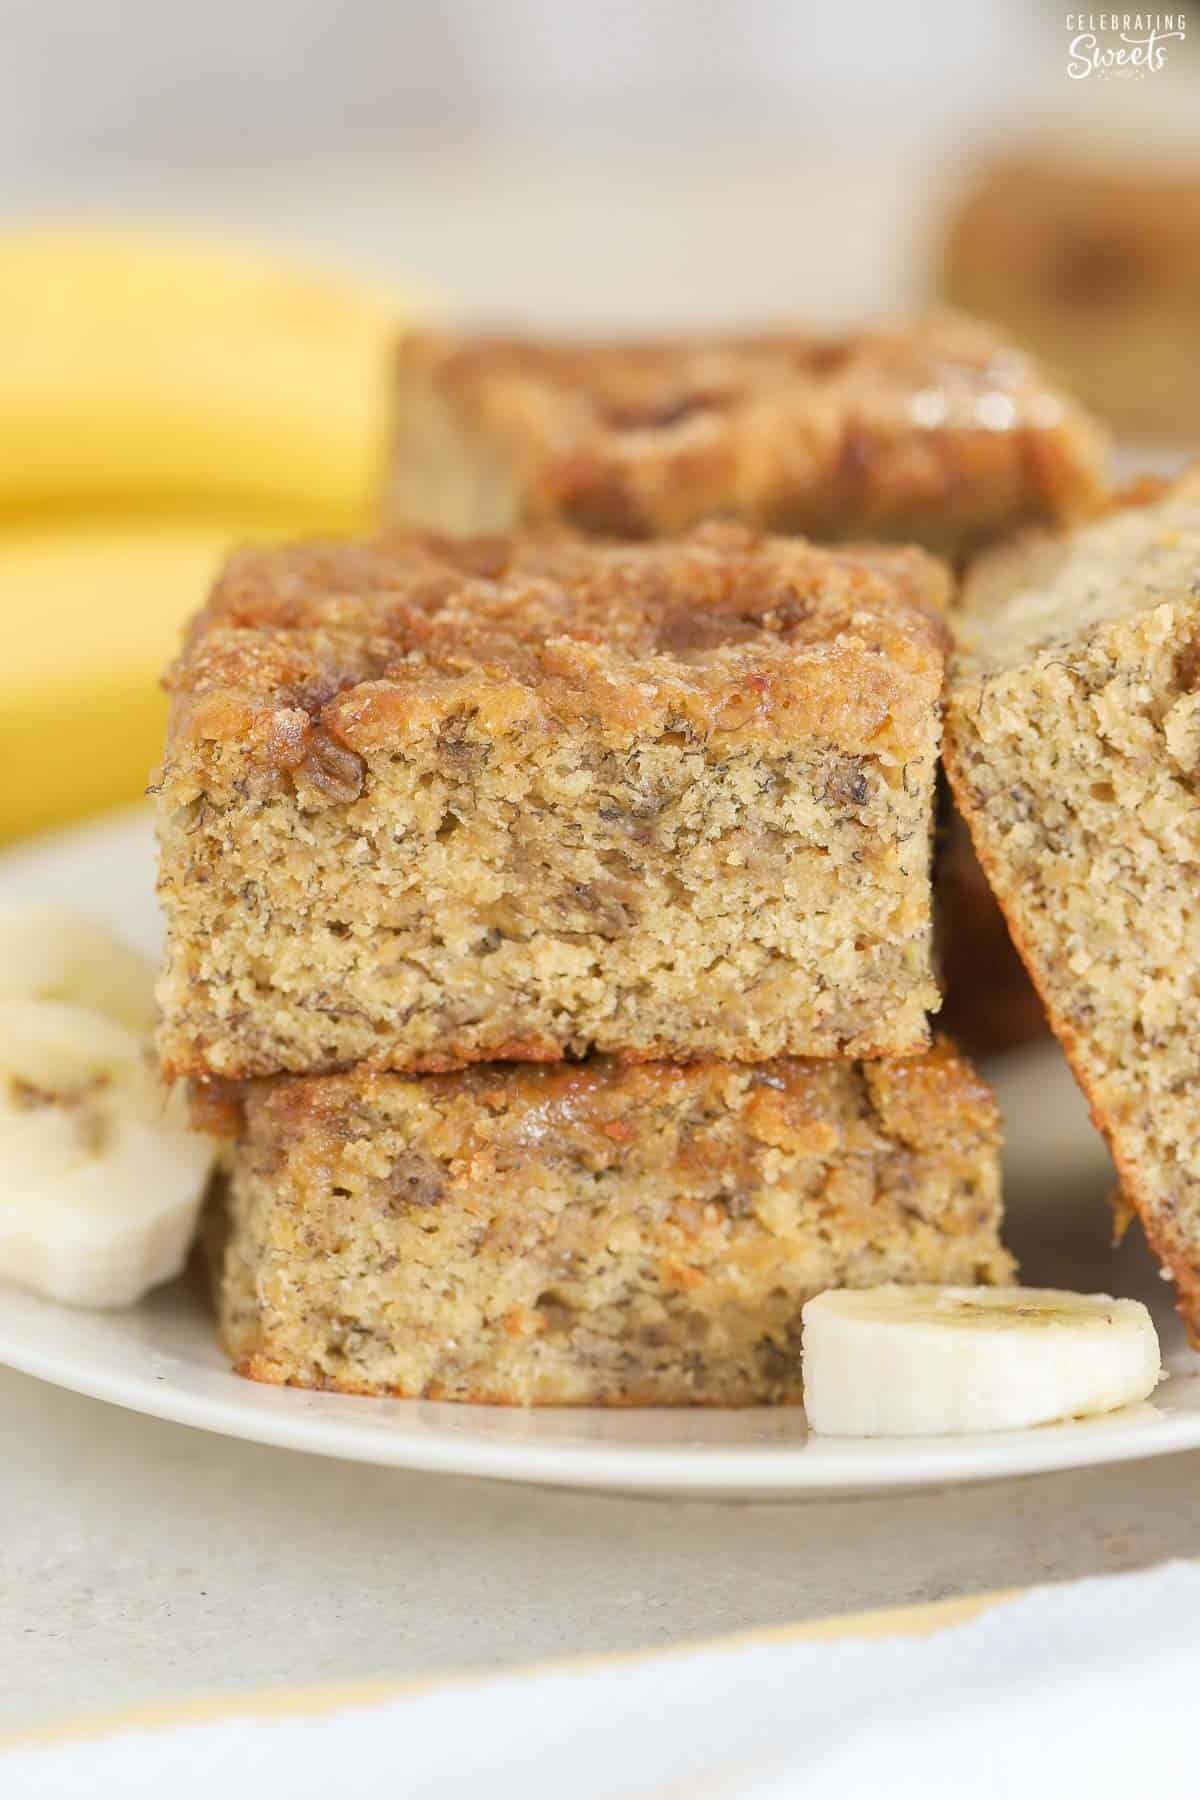 Slices of banana bread on a white plate.